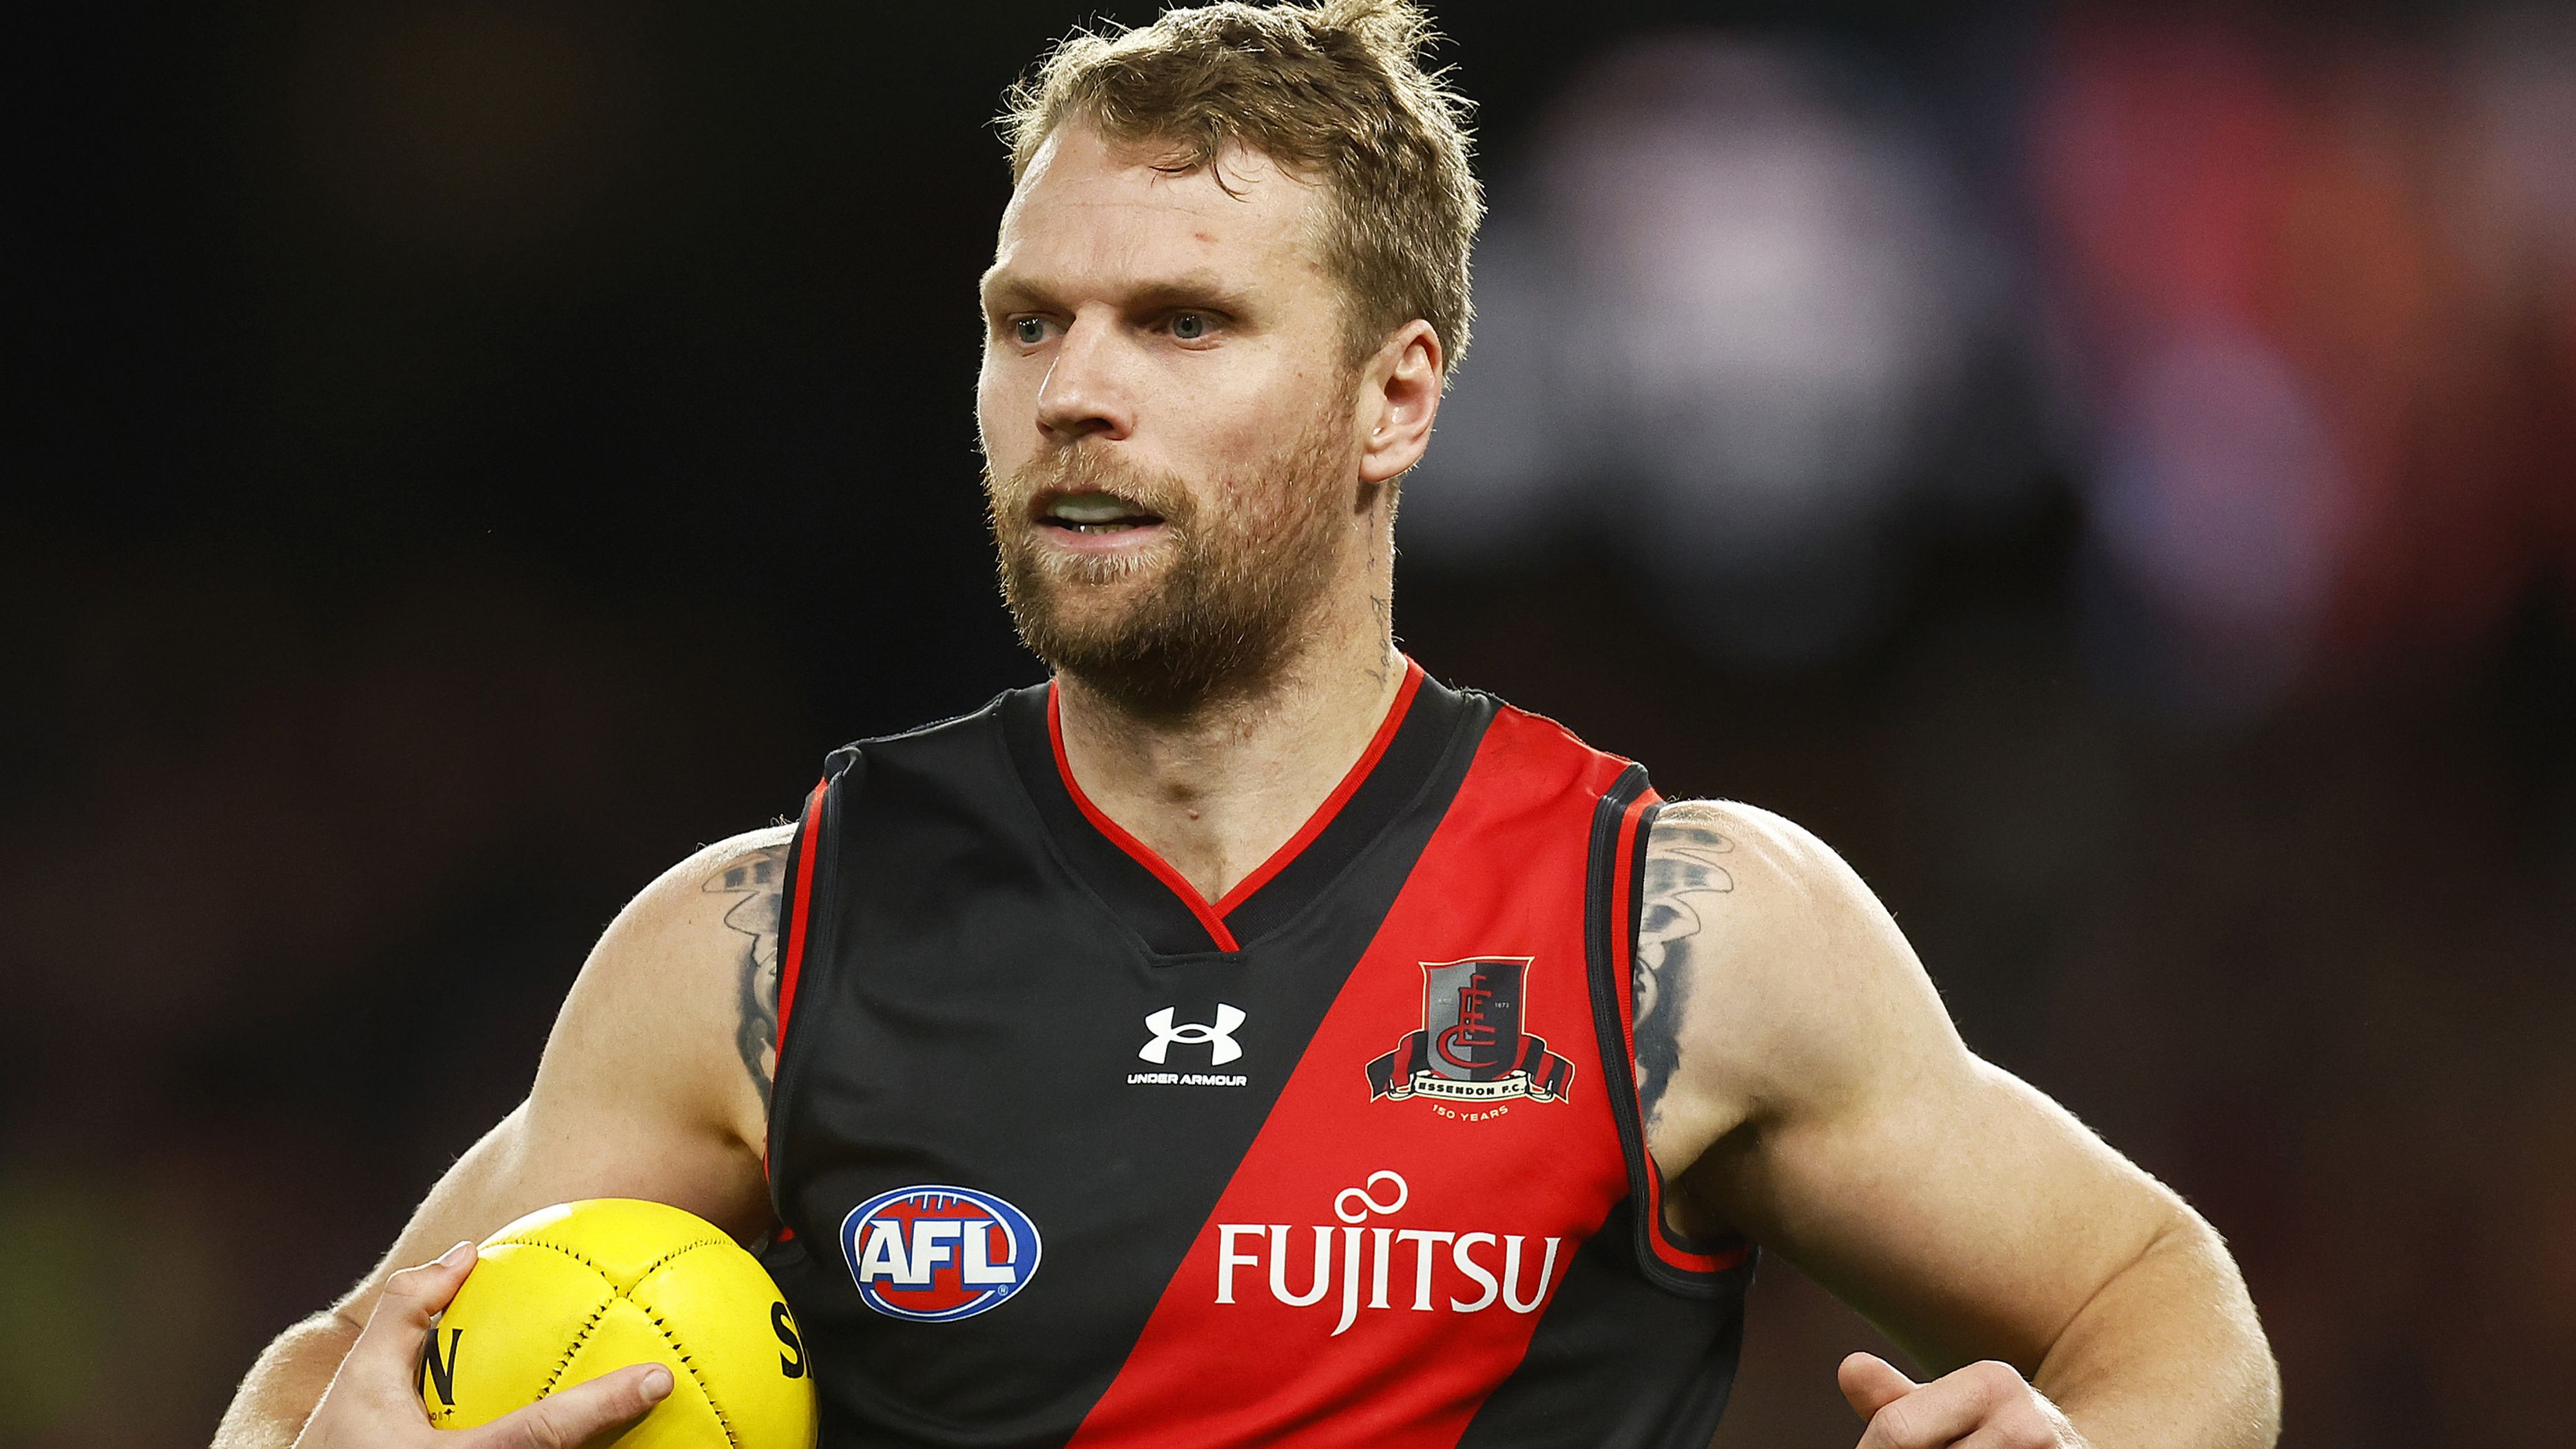 MELBOURNE, AUSTRALIA - JULY 17: Jake Stringer of the Bombers in action during the round 18 AFL match between the Essendon Bombers and the Gold Coast Suns at Marvel Stadium on July 17, 2022 in Melbourne, Australia. (Photo by Daniel Pockett/Getty Images)